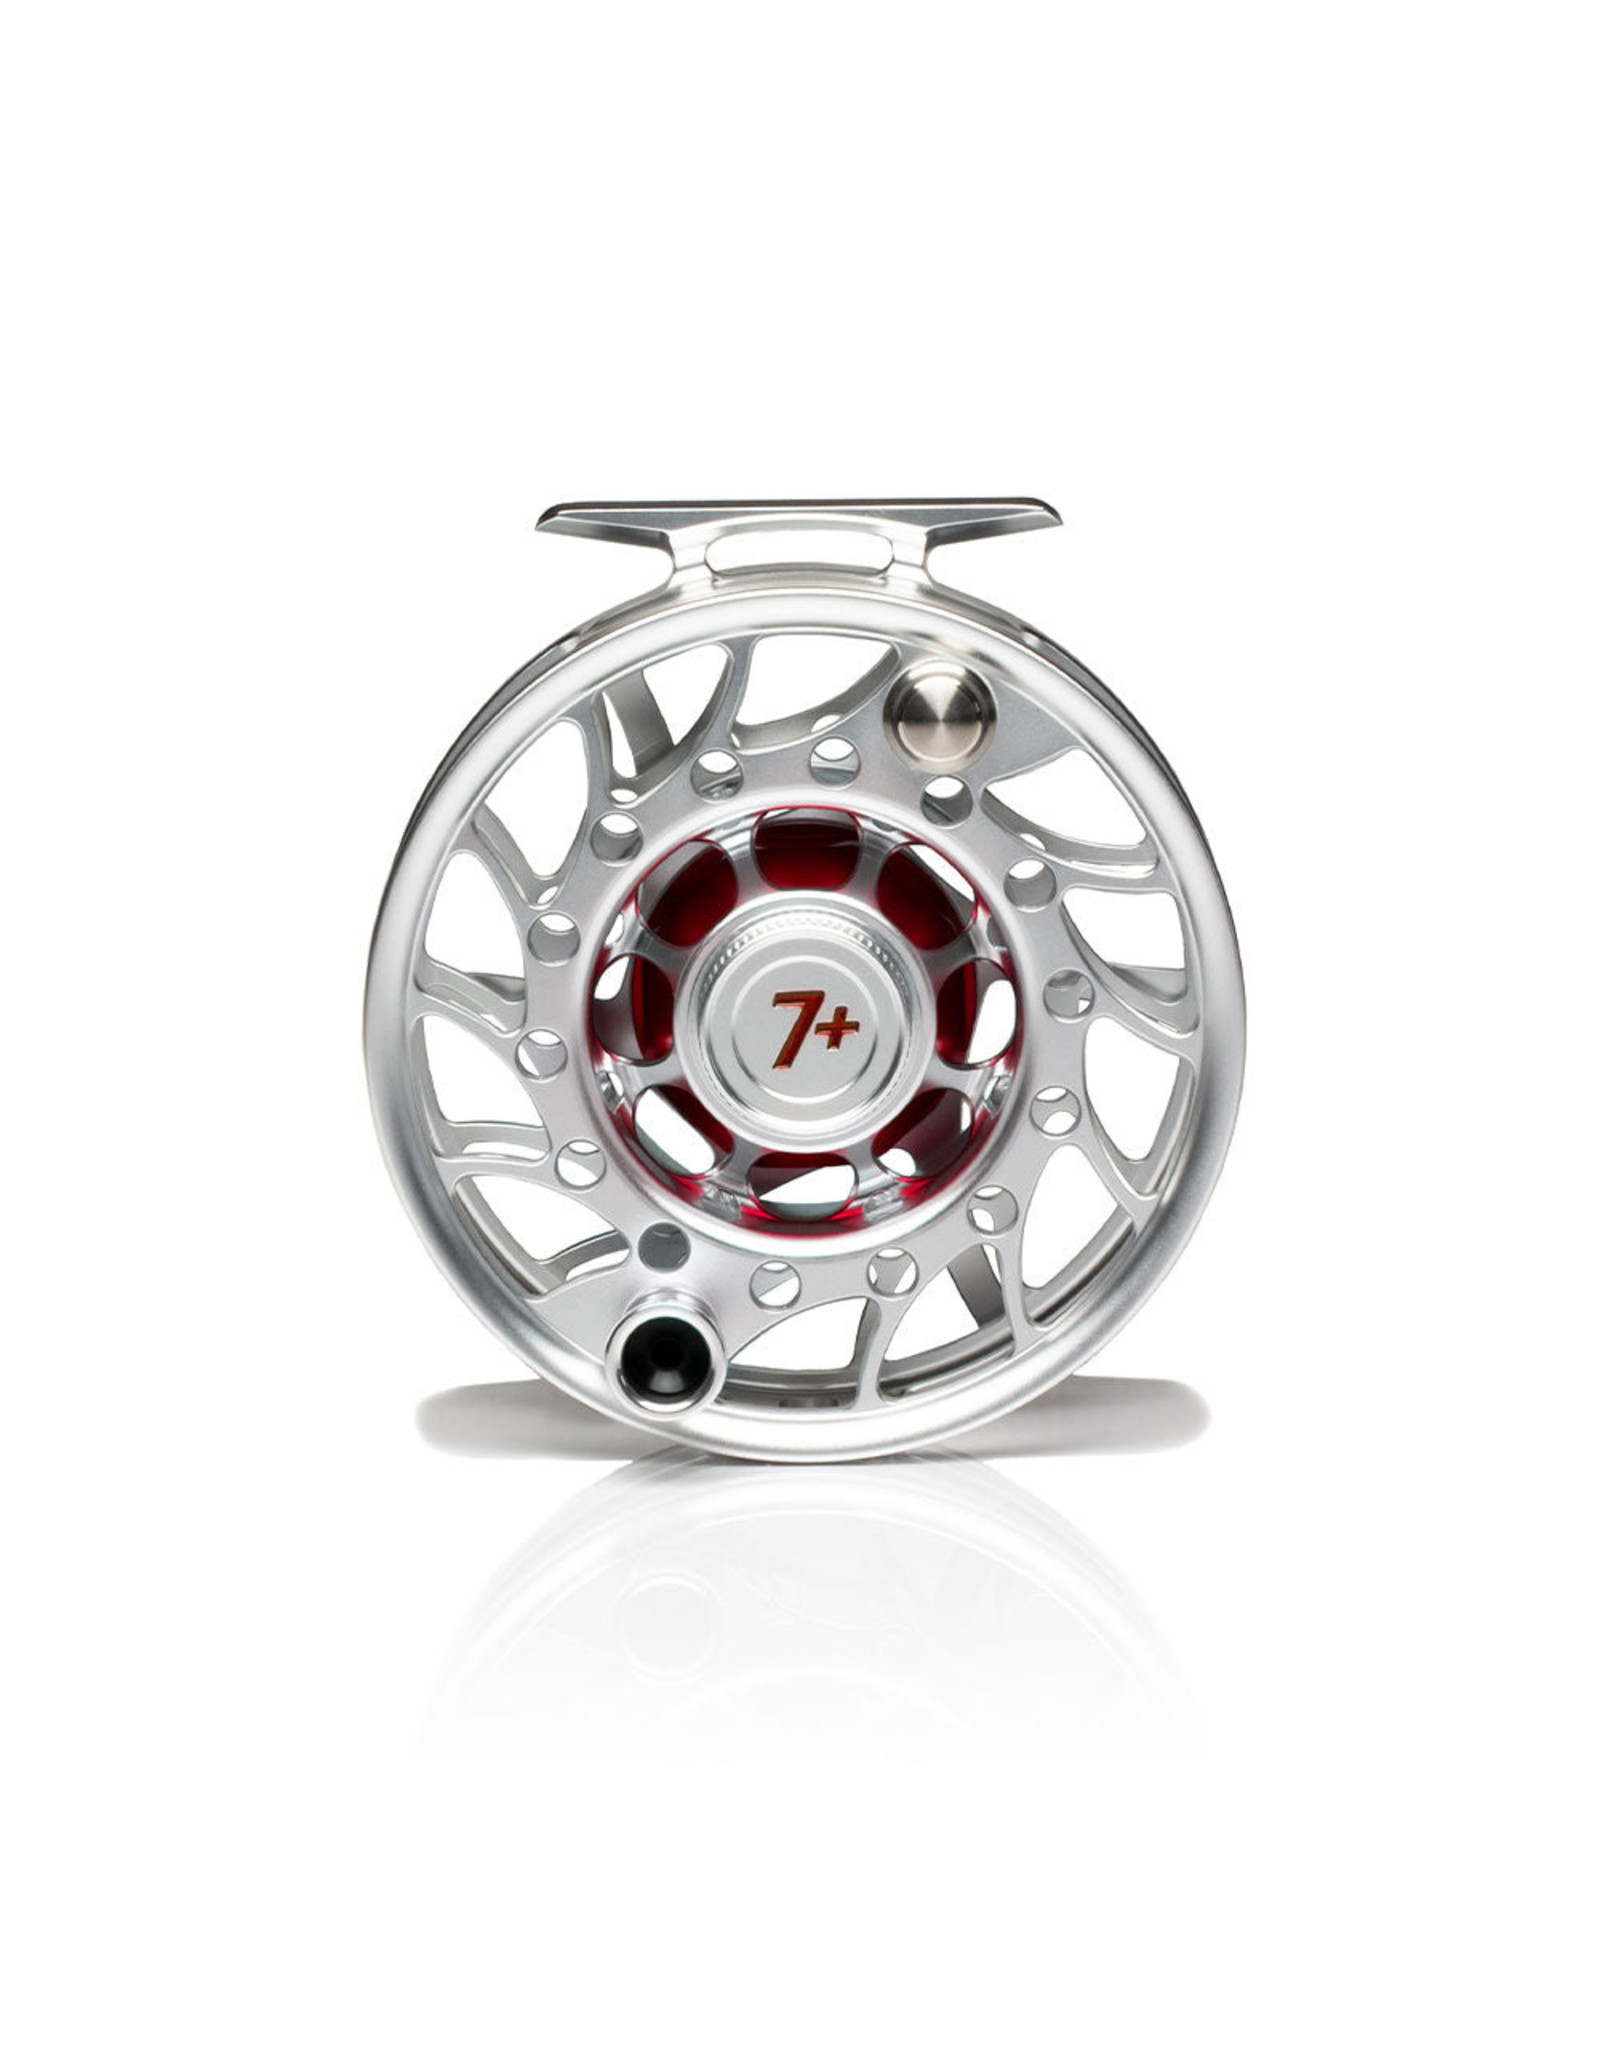 Hatch Hatch Iconic Reel Clear/Red 7+ Mid Arbor